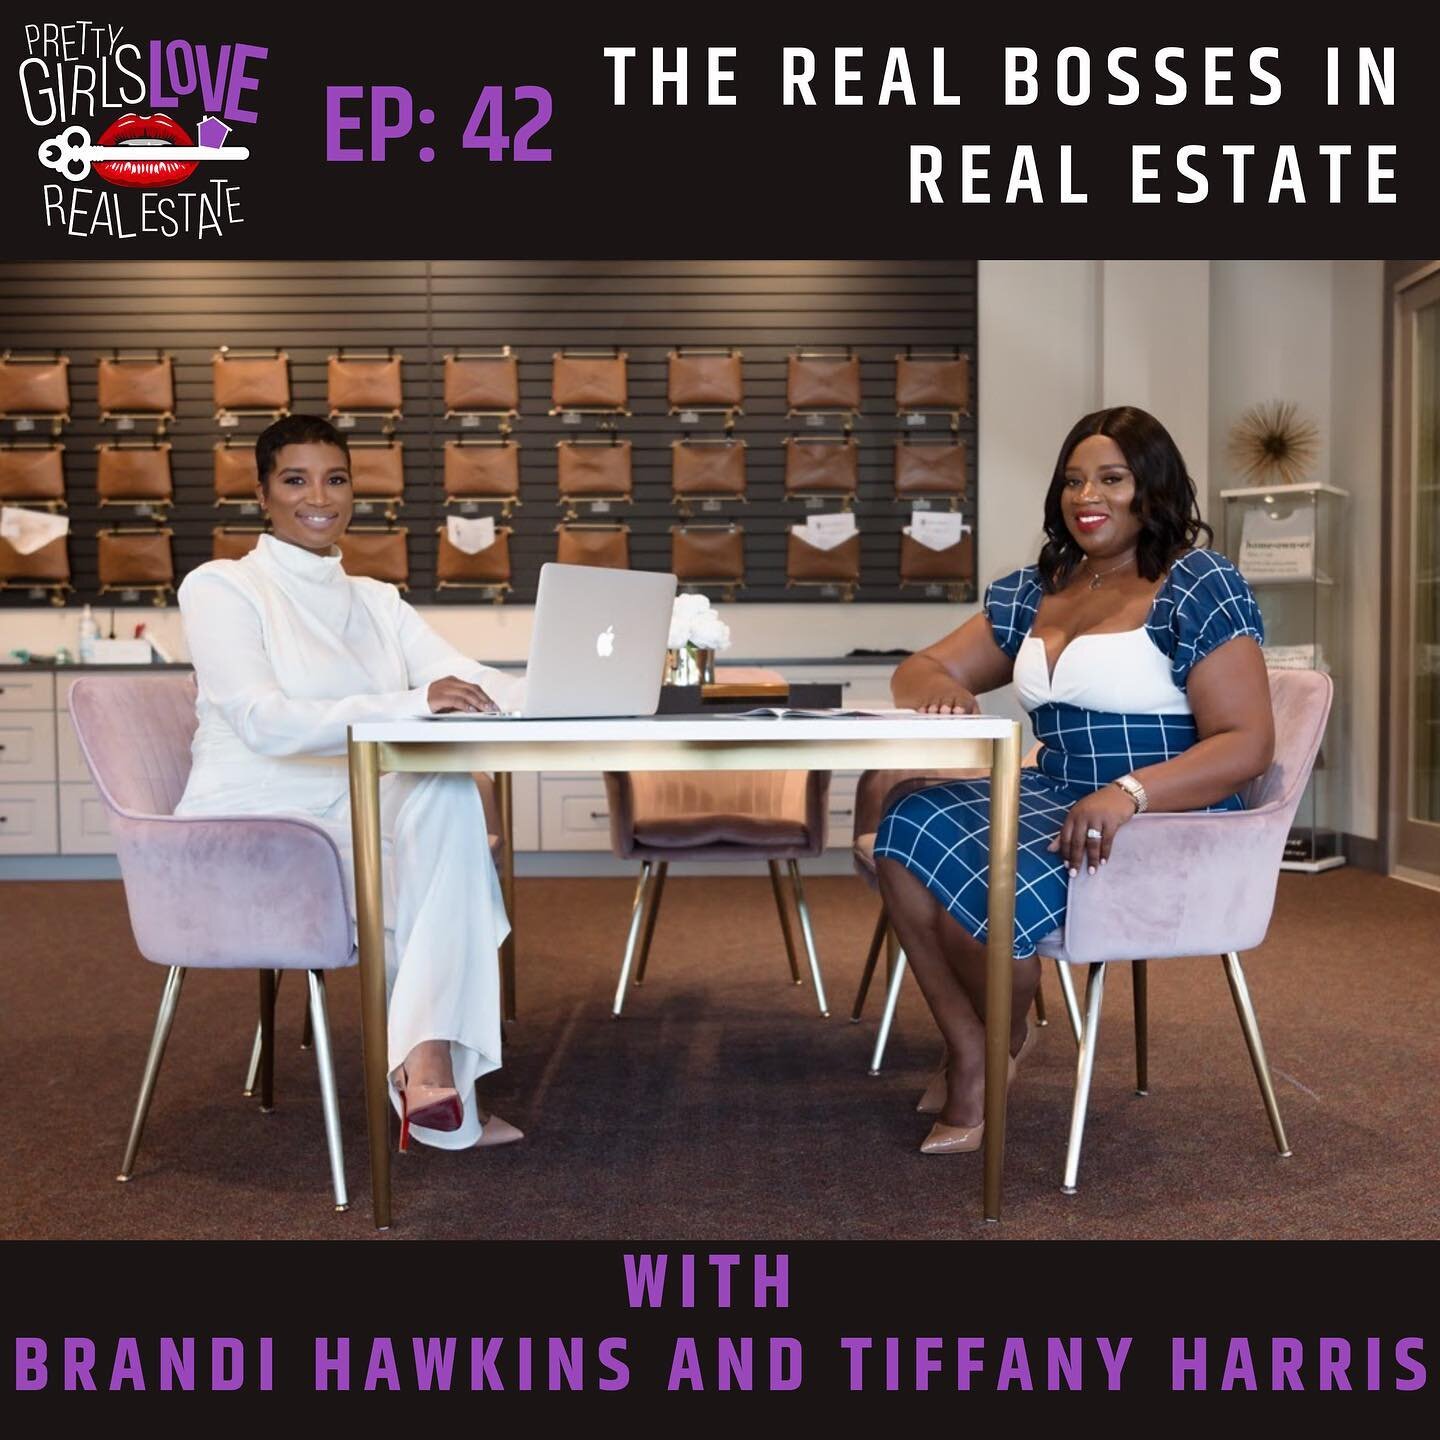 On episode 42 of @prettygirlsloverealestate, I chat with @thebrandihawkins and @tiffharris_therealtor, founders and owners of @harrishawkinsandco, a real estate brokerage based in Baltimore. During our conversation we discuss:

- Requirements to beco